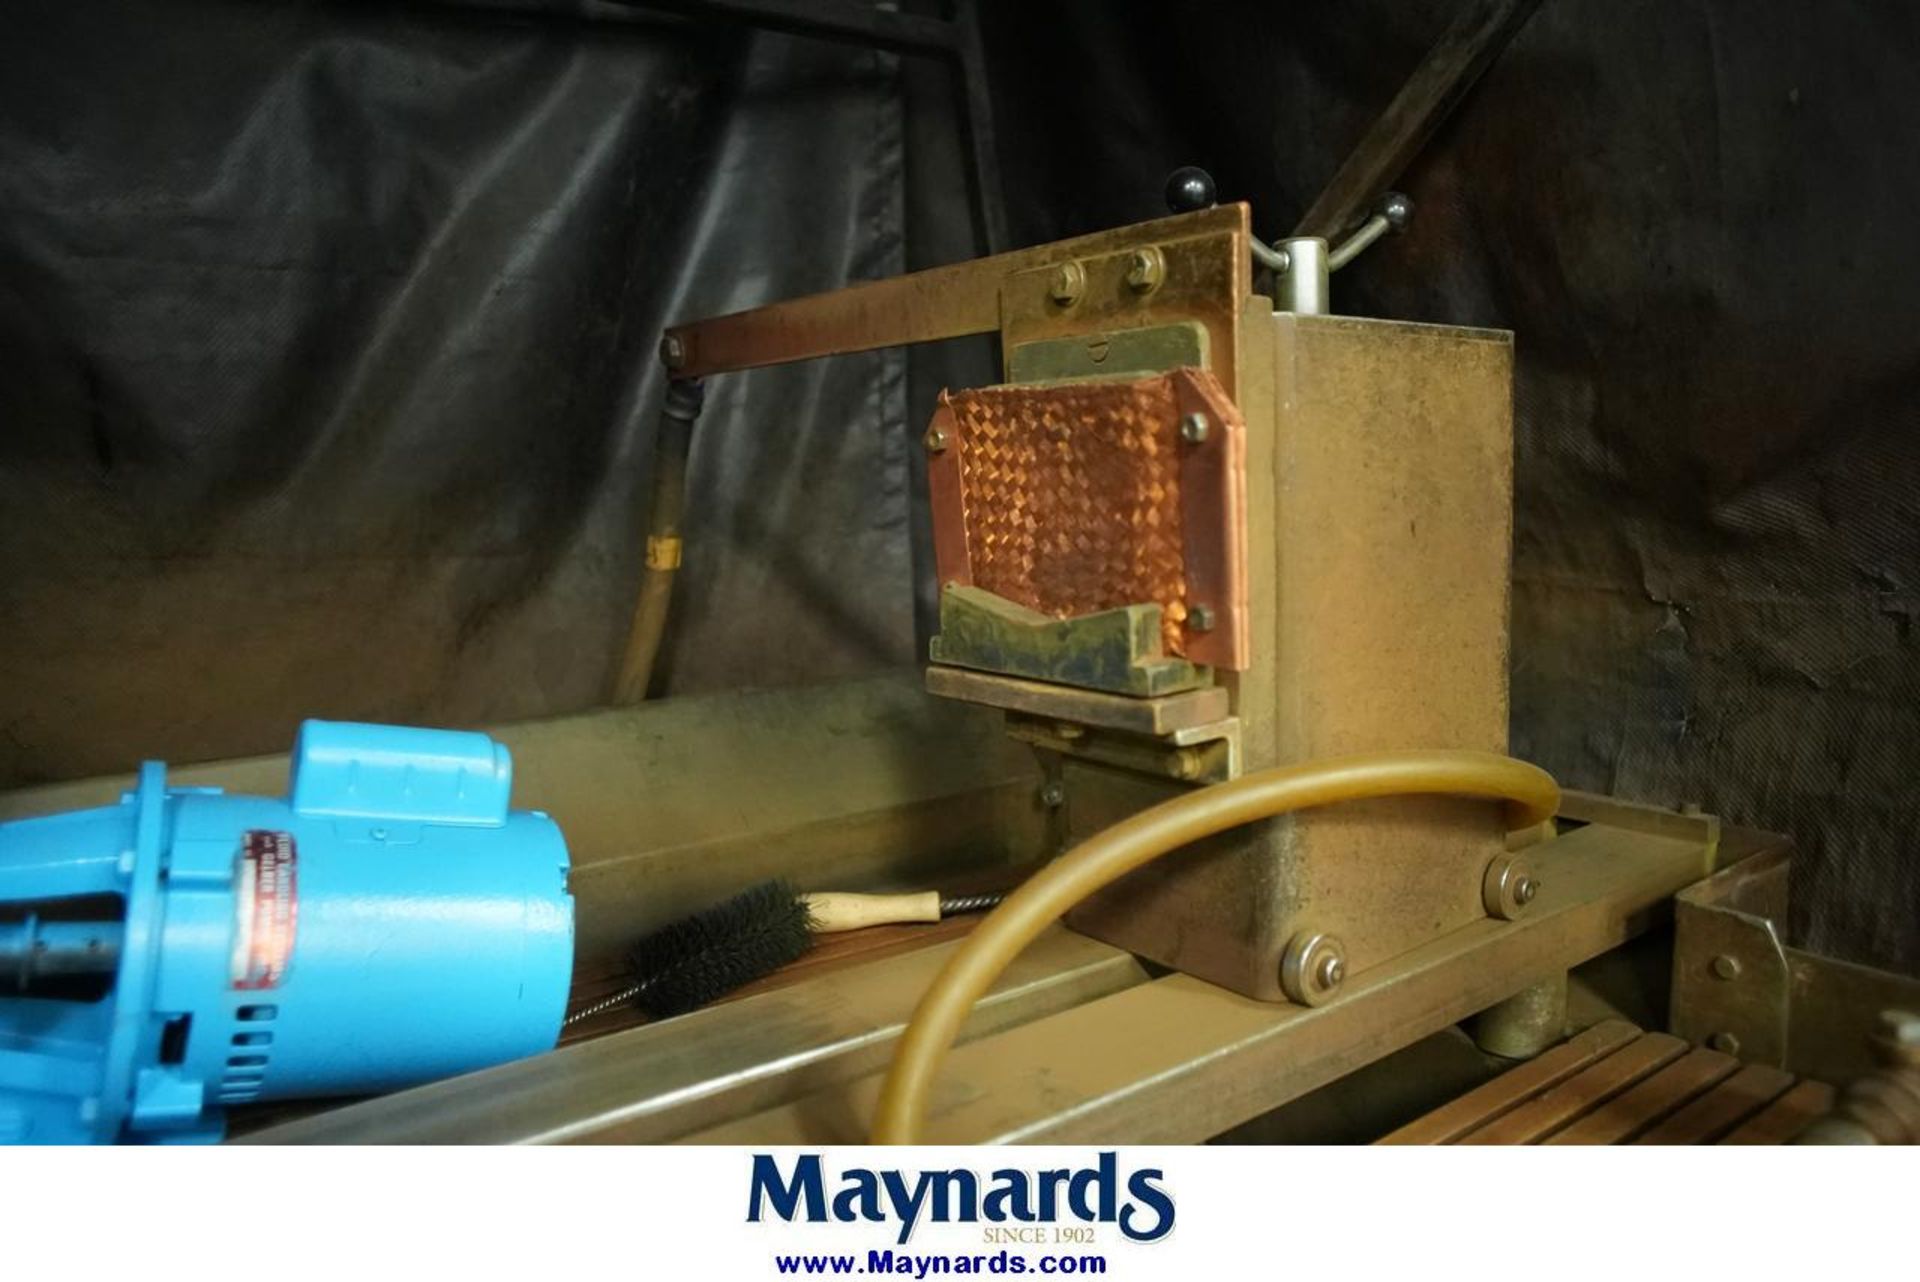 Ardrox Model 3453 Magnetic Particle Inspection Machine - Image 5 of 7